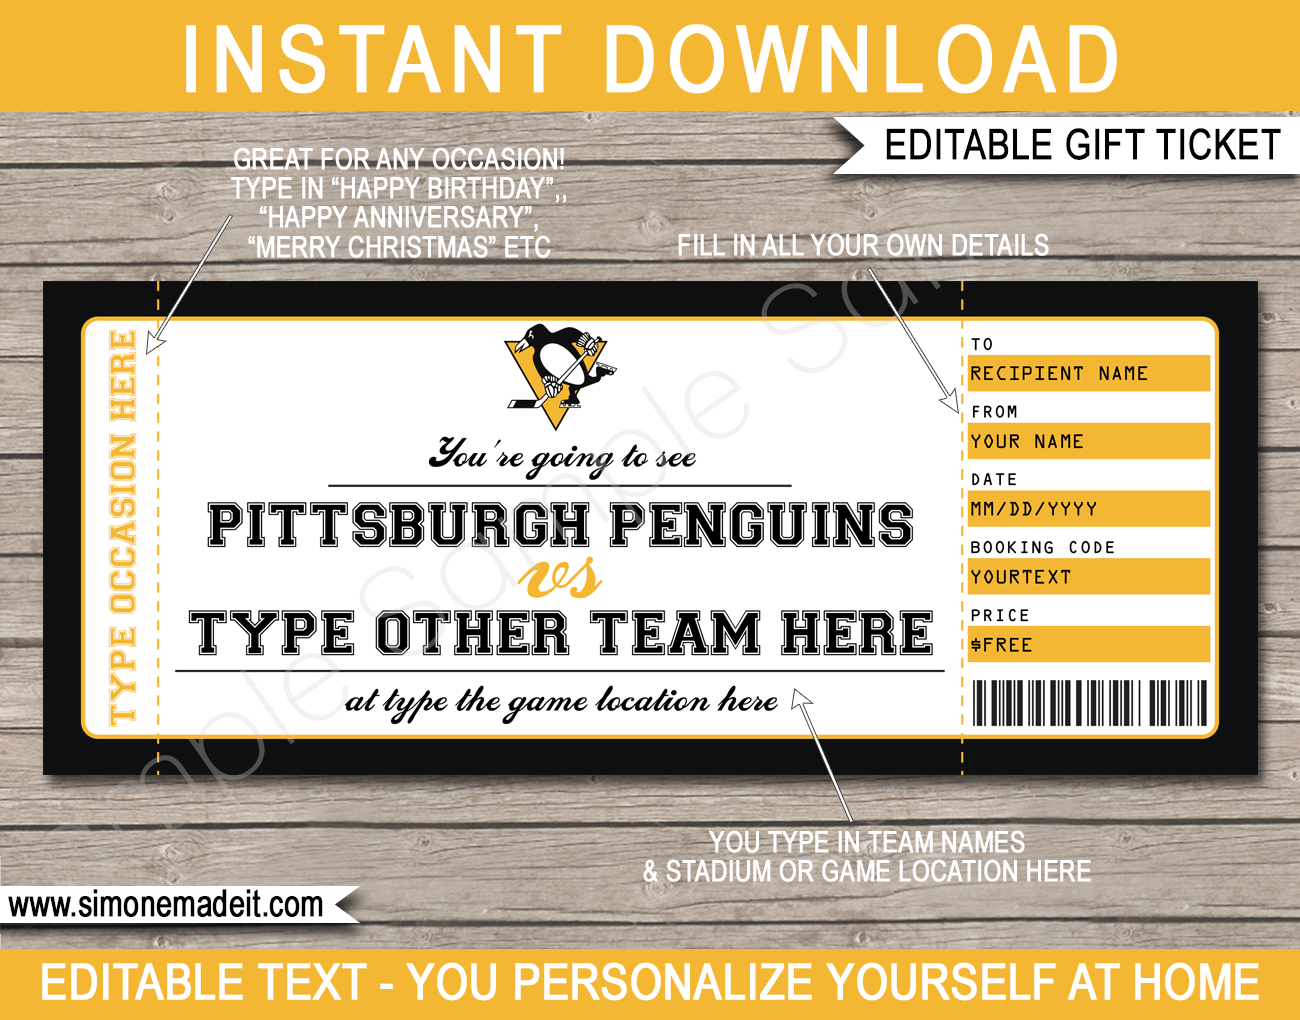 Game Ticket Template from www.giftsbysimonemadeit.com